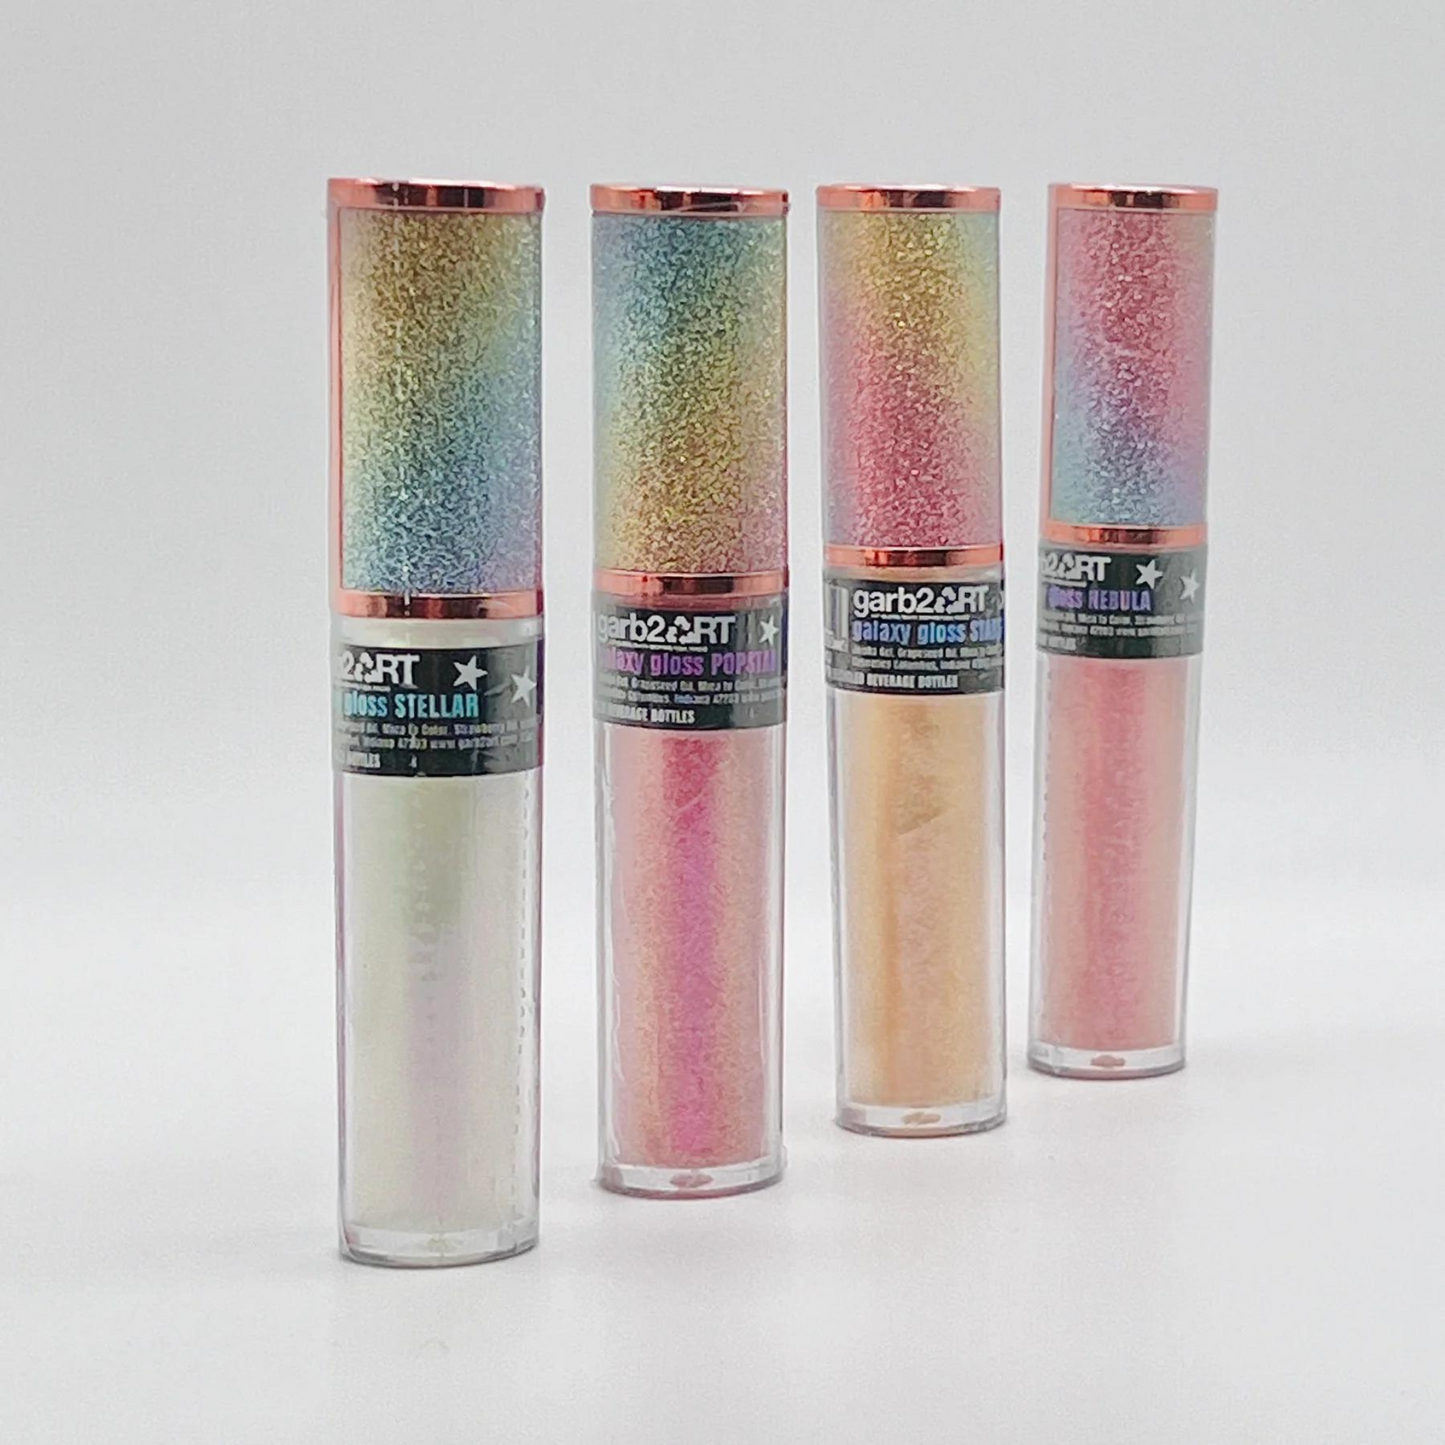 Galaxy Gloss is a top-quality lip gloss, handmade in the USA with natural ingredients. It provides extreme sparkle and nourishes your lips, giving them a fun, flavorful, and fabulous look. Available in various shades, including popstar, stellar, nebula, and starstruck. Experience the out-of-this-world shine with Galaxy Gloss.